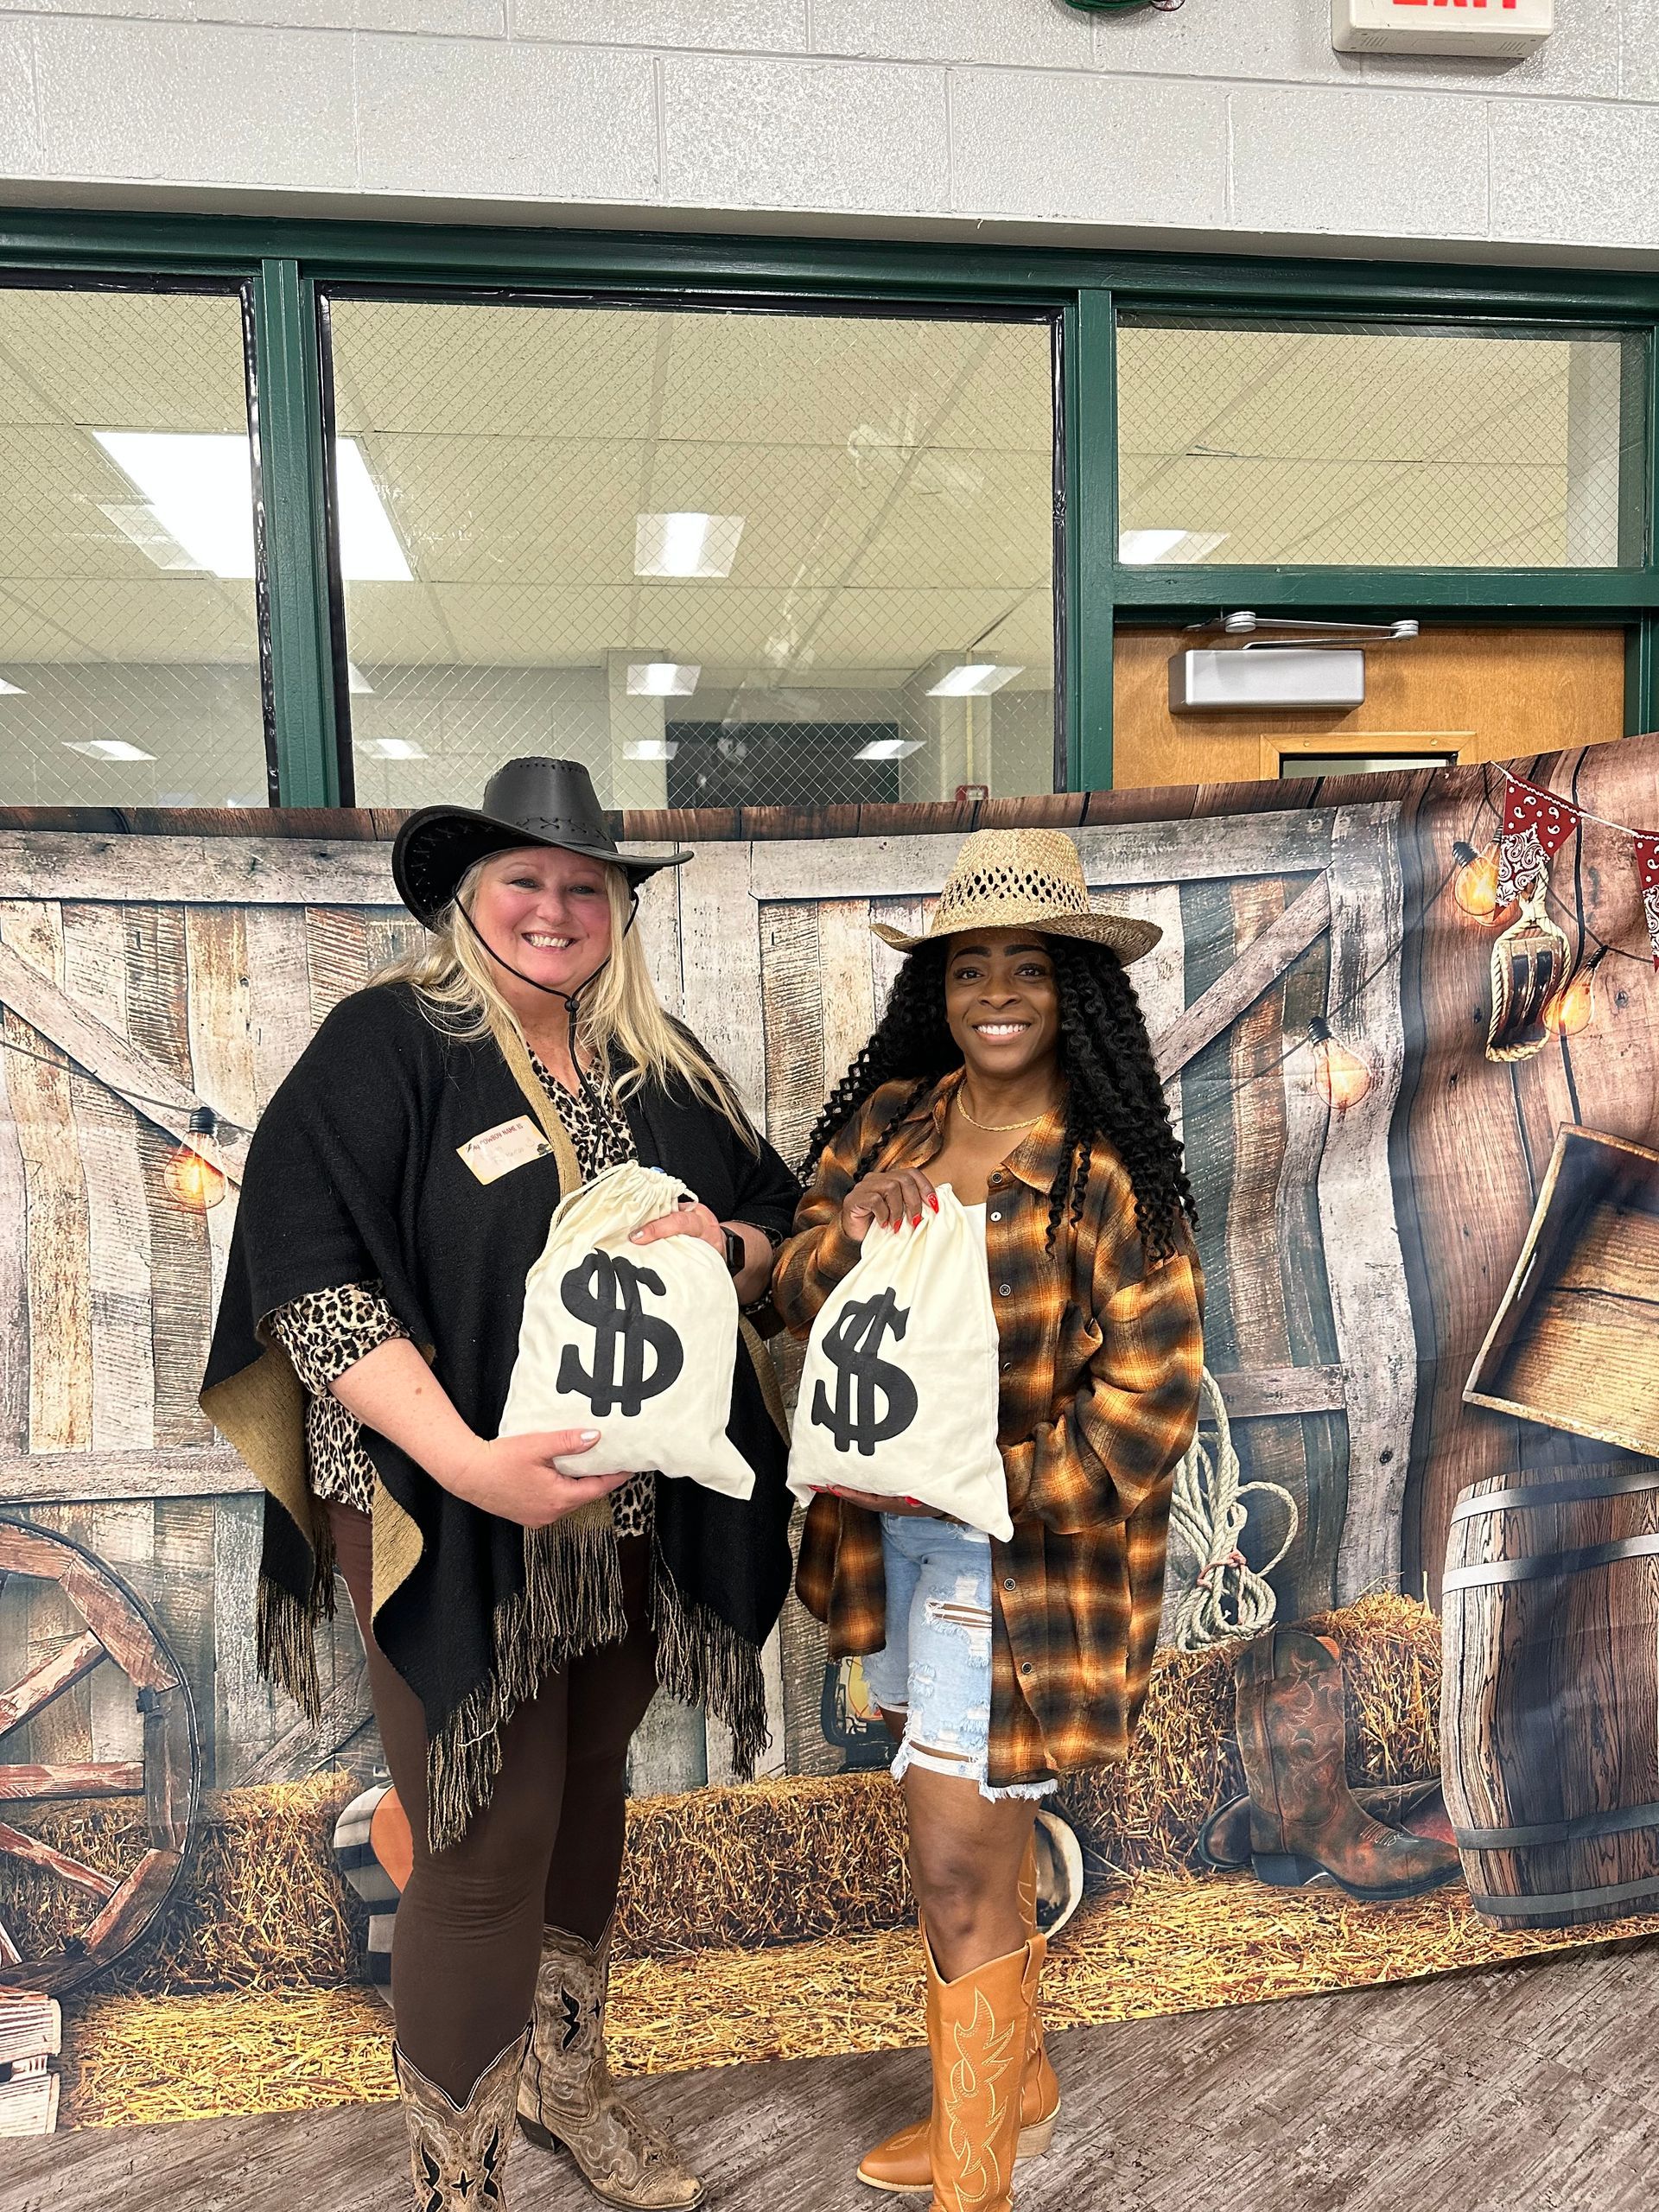 Two women in cowboy costumes are standing next to each other holding bags of money.